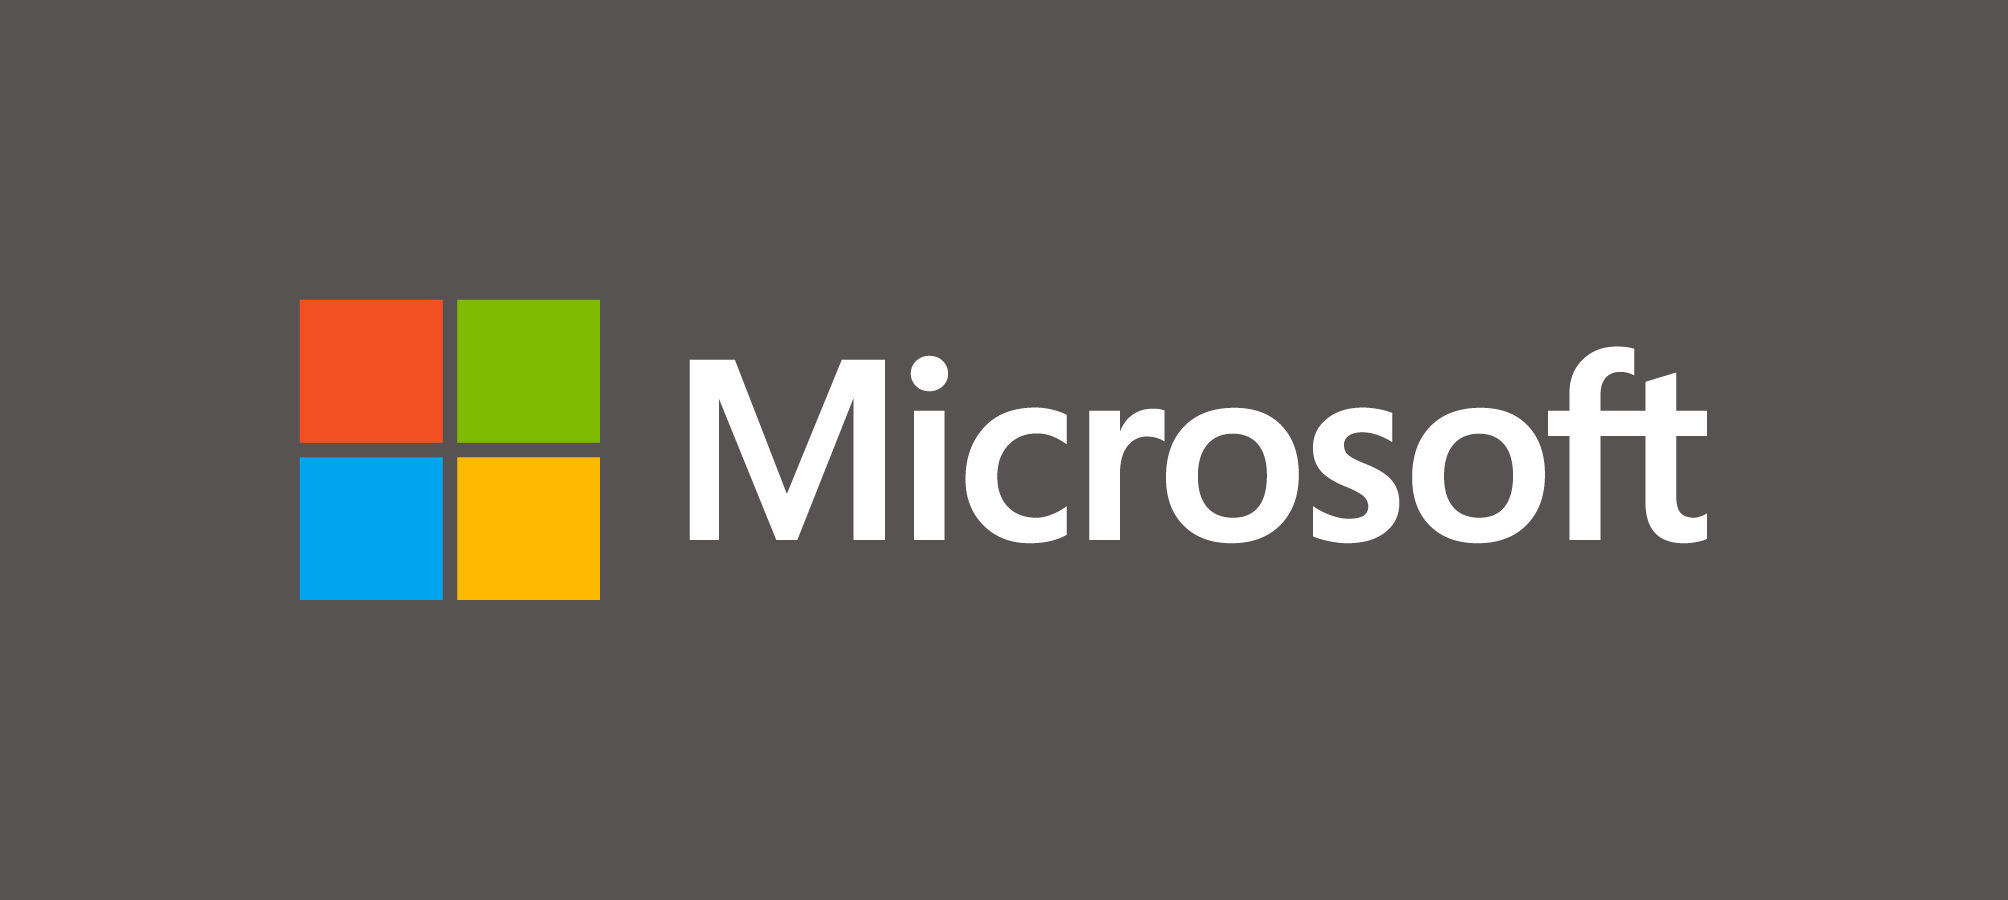 Microsoft and Onyxes (formally Al-Jareed) for Electronic & IT Banking Technology Forum in Iraq